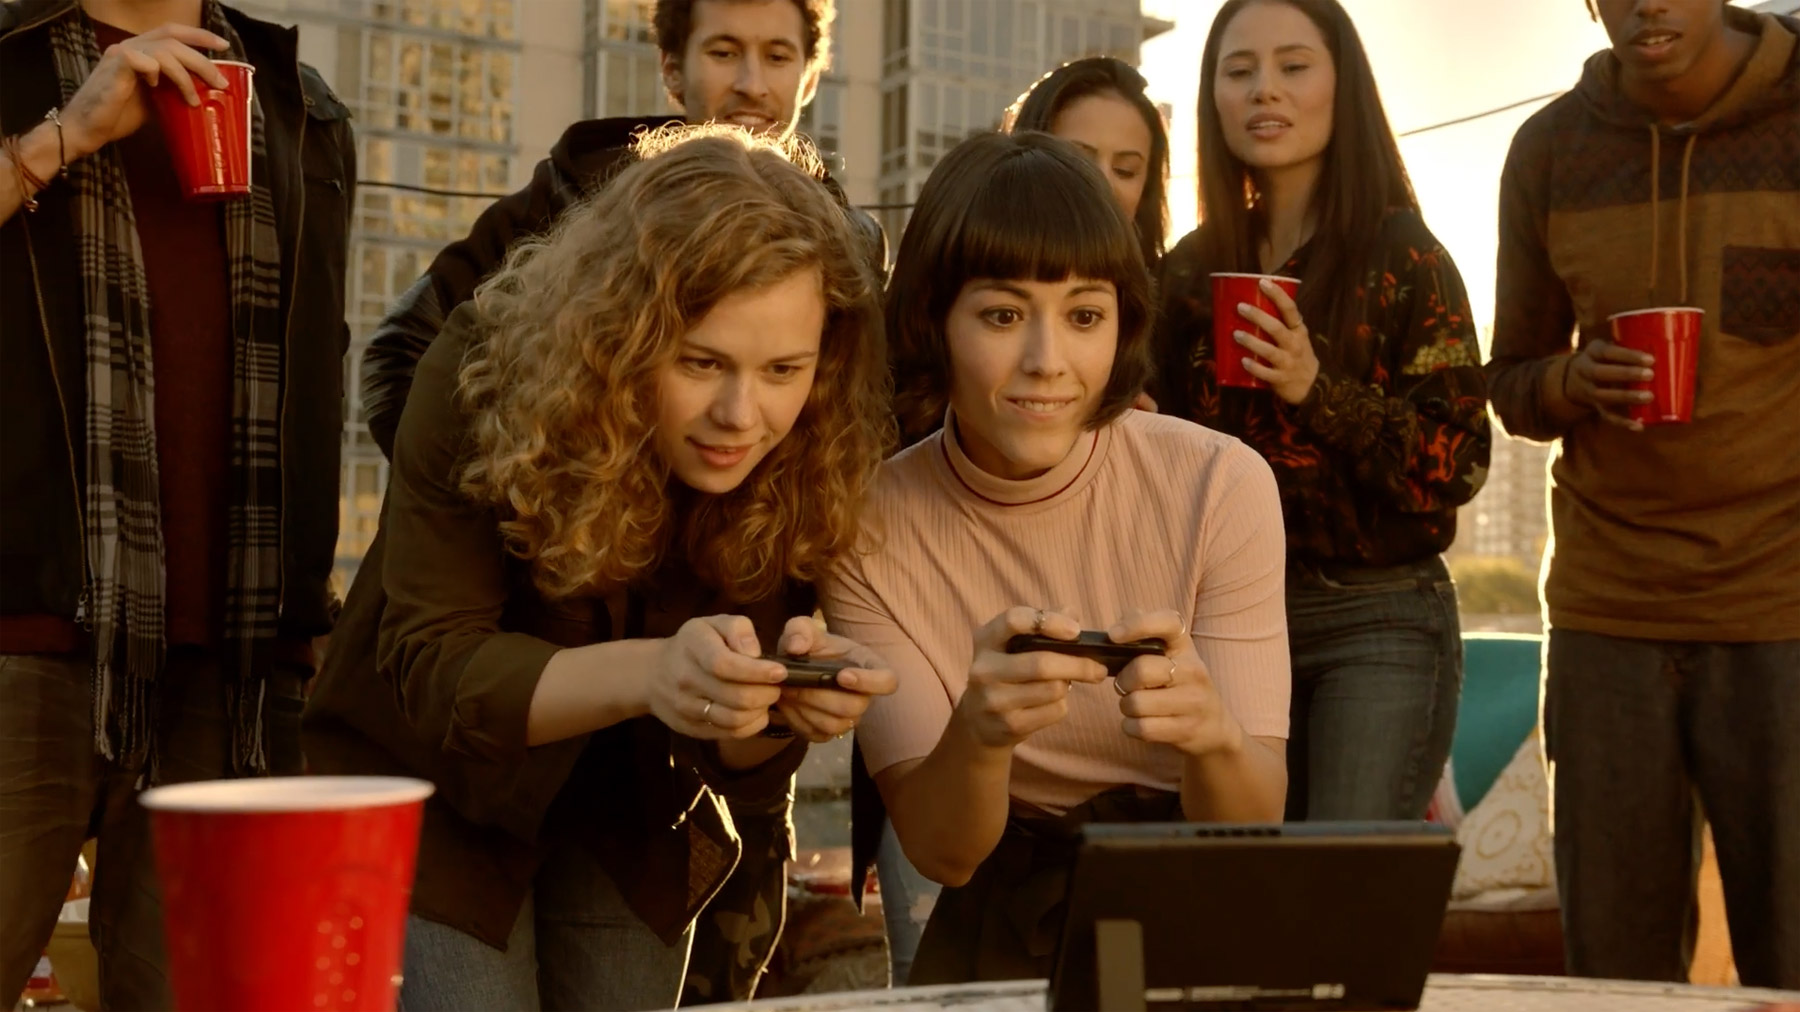 Nintendo Switch - ‘Karen’ playing switch on rooftop